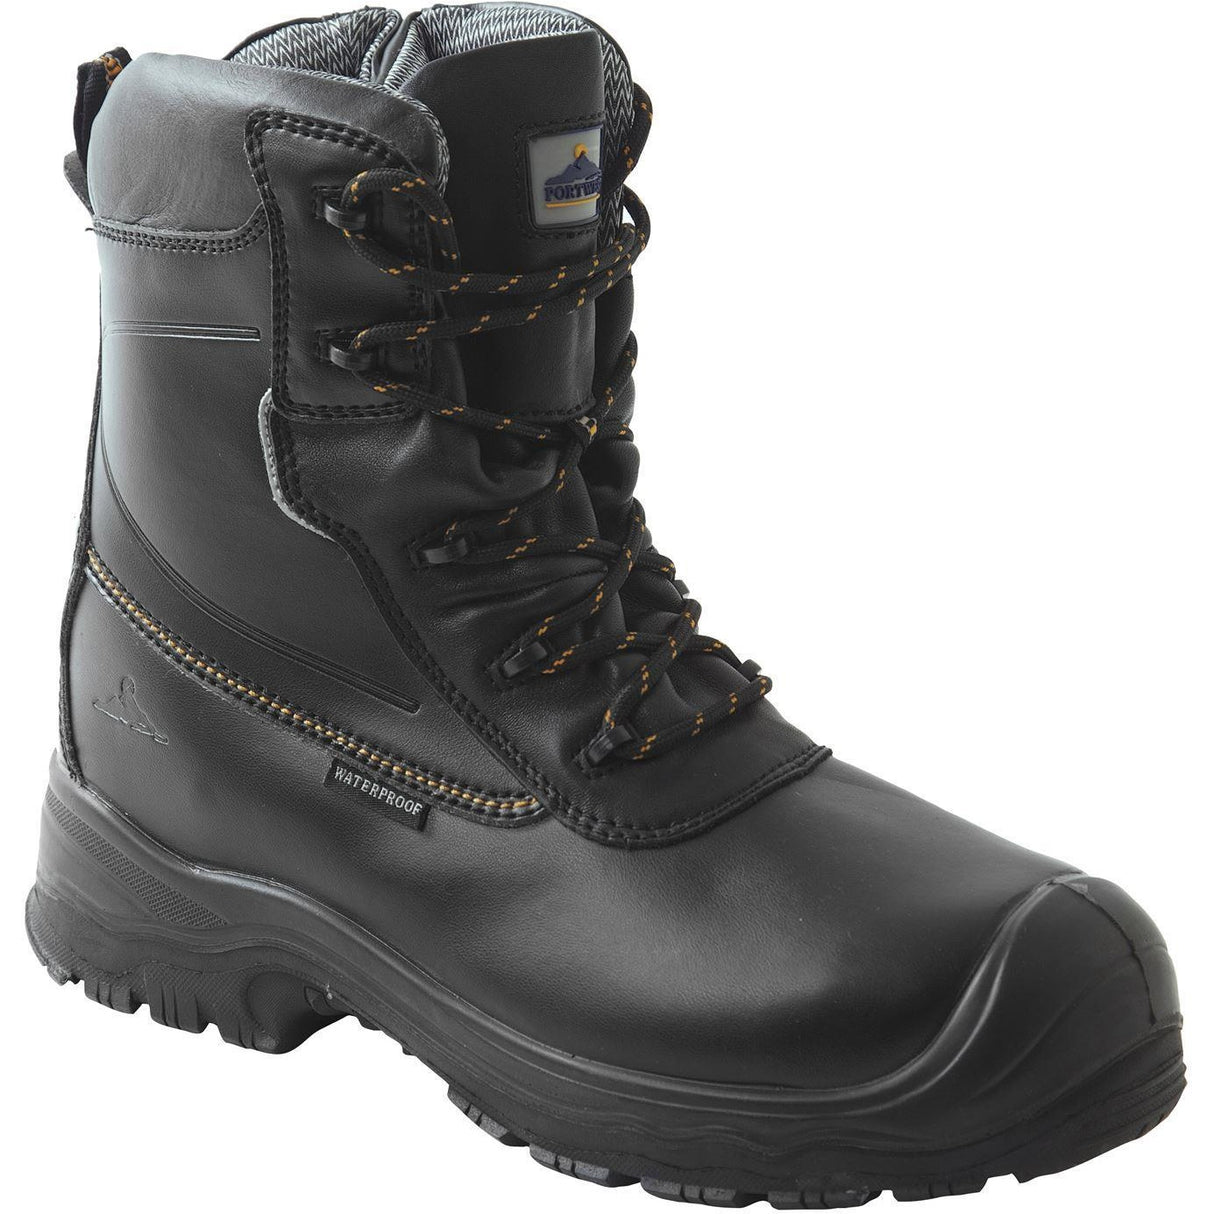 Portwest Compositelite Traction 7 inch Safety Boot